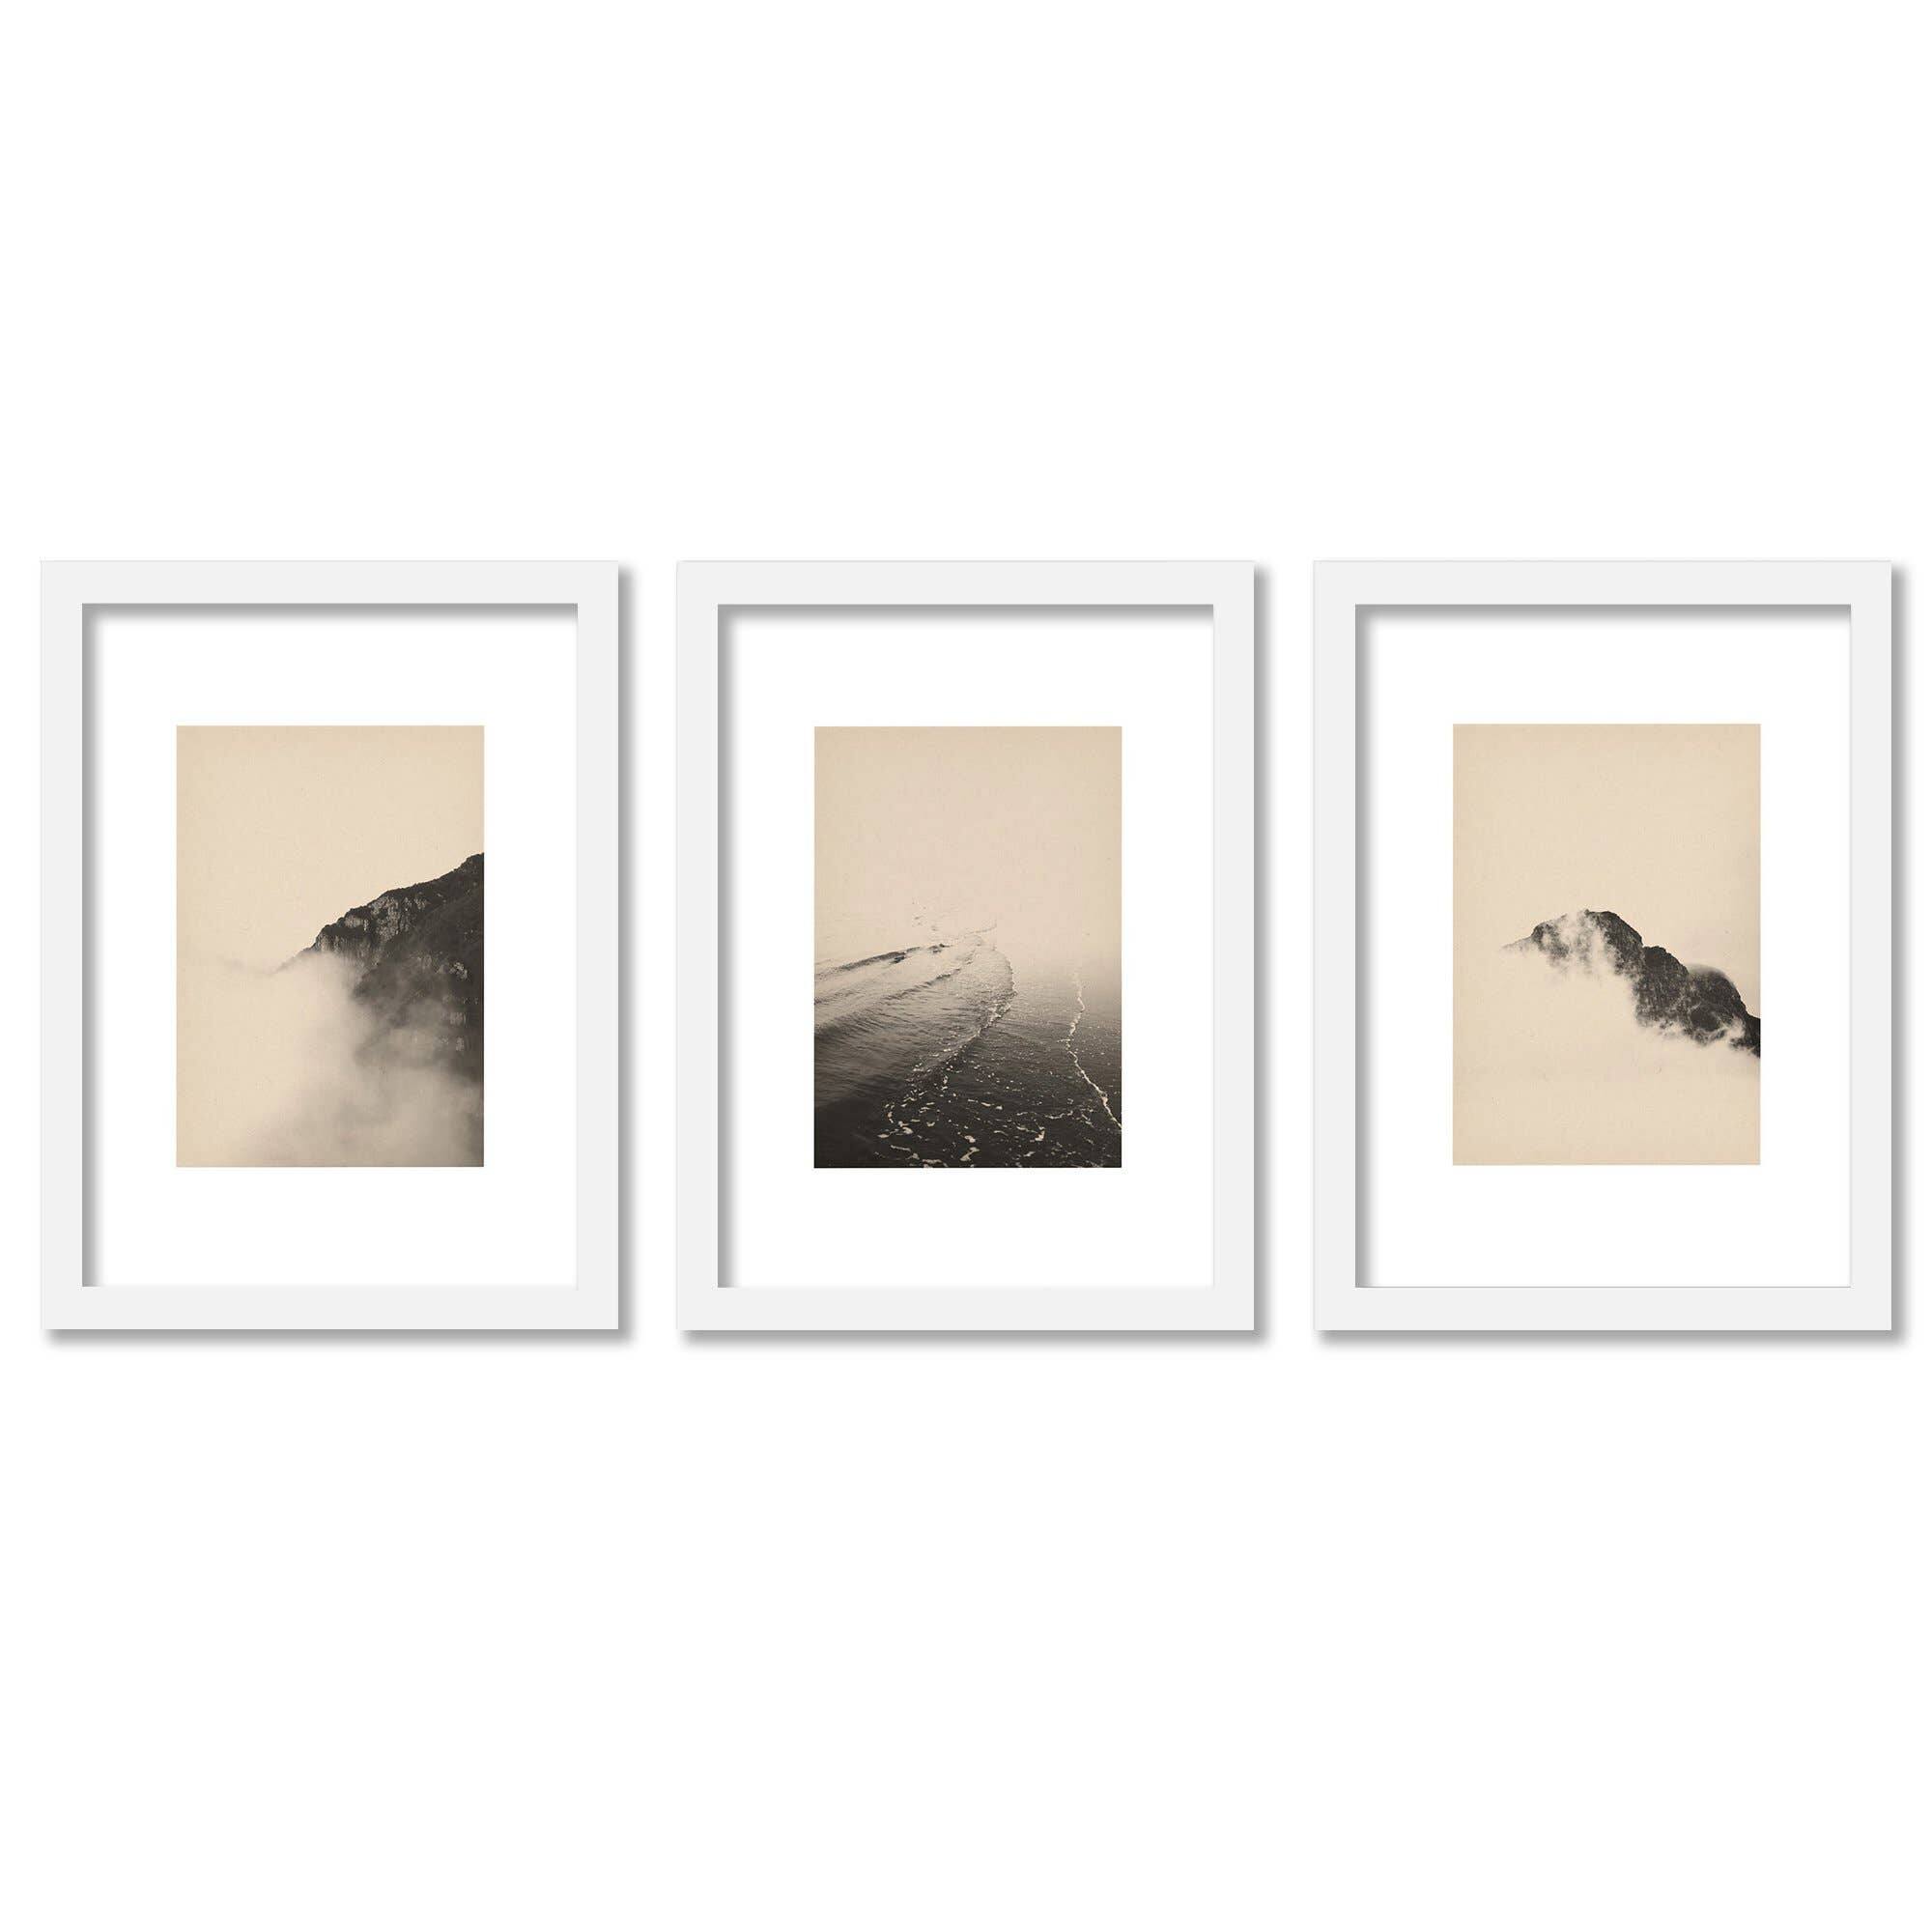 Sepia Nature Scape Roseanne Kenny Abstract 2 - 3 Piece Framed Gallery Art Set